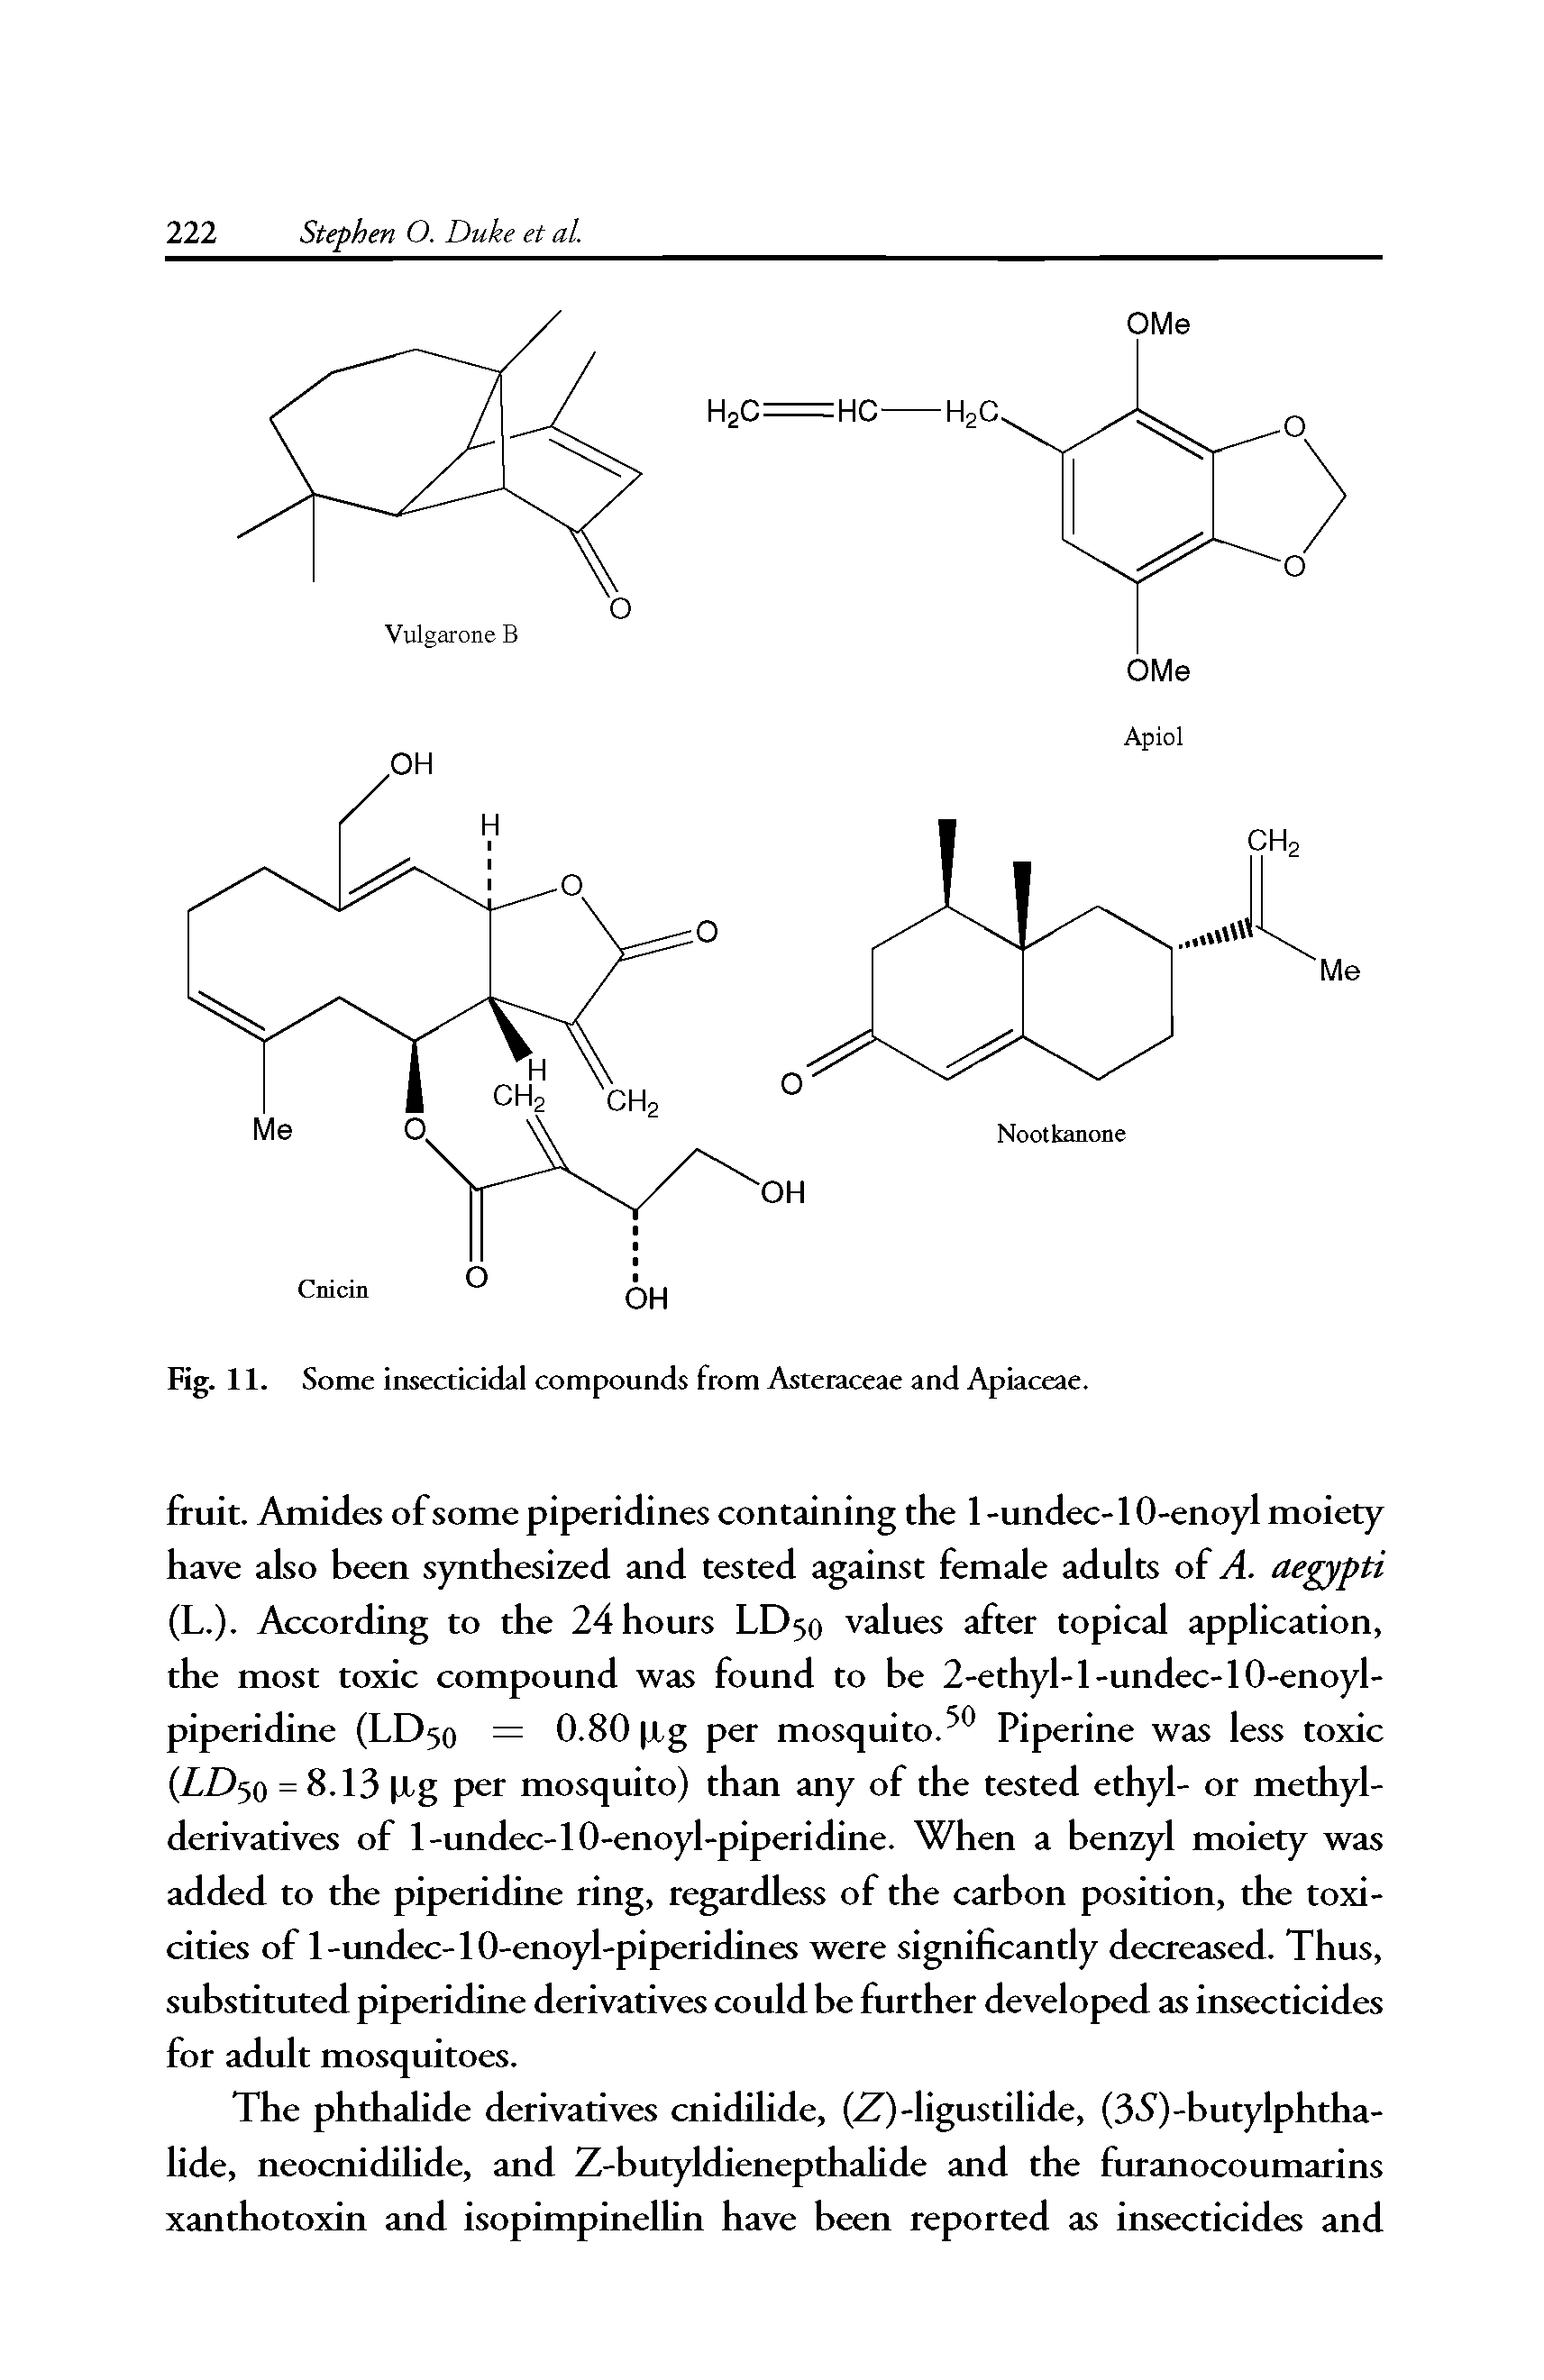 Fig. 11. Some insecticidal compounds from Asteraceae and Apiaceae.